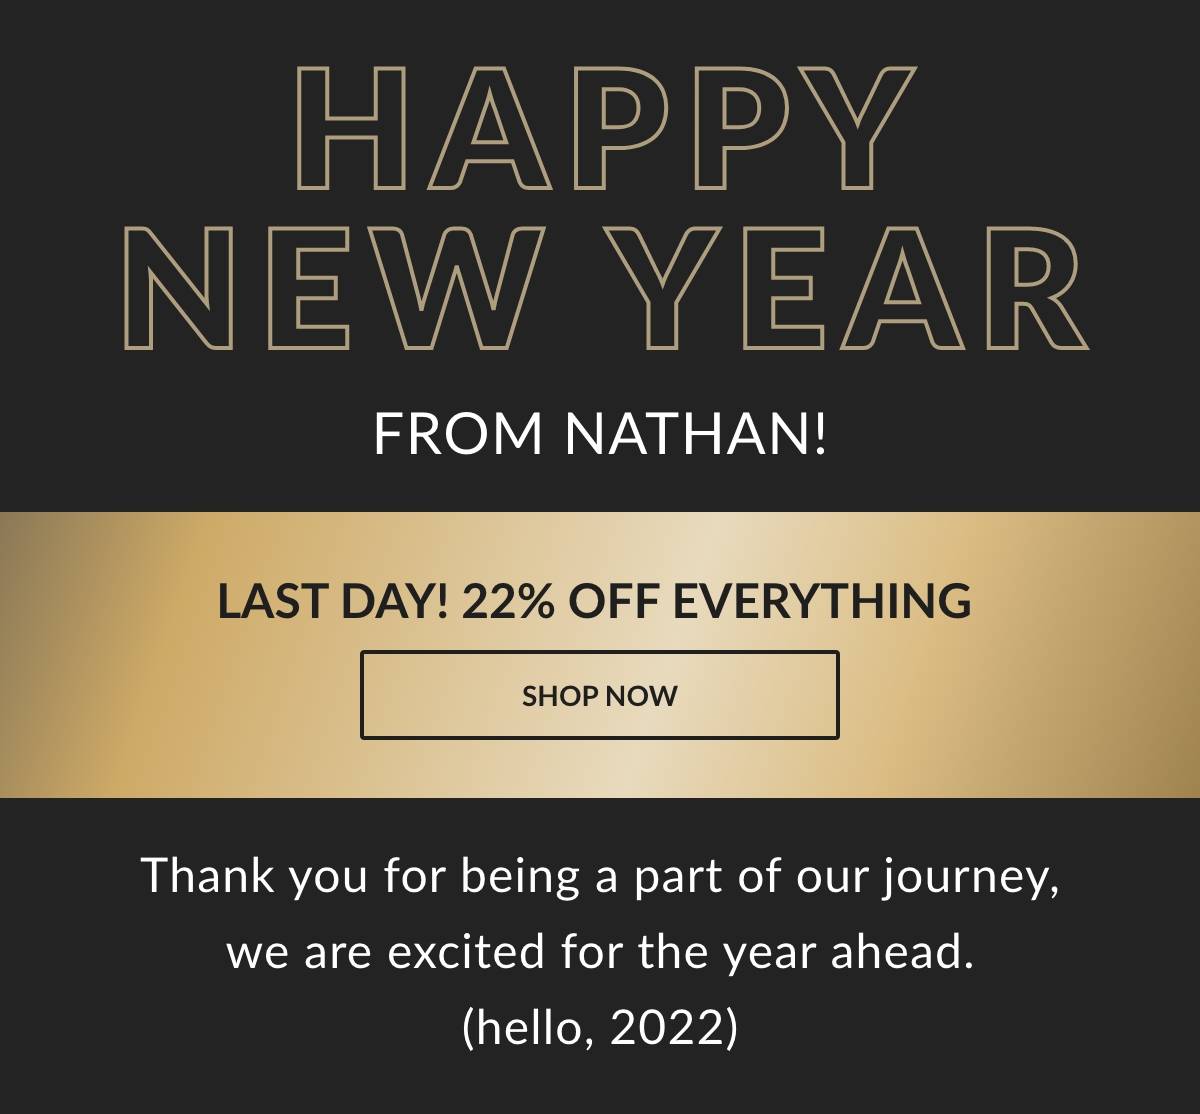 Happy New Year from Nathan! Last Day! 22% Off Everything. Shop Now. Thank you for being a part of our journey, we are excited for the year ahead. (Hello, 2022!)